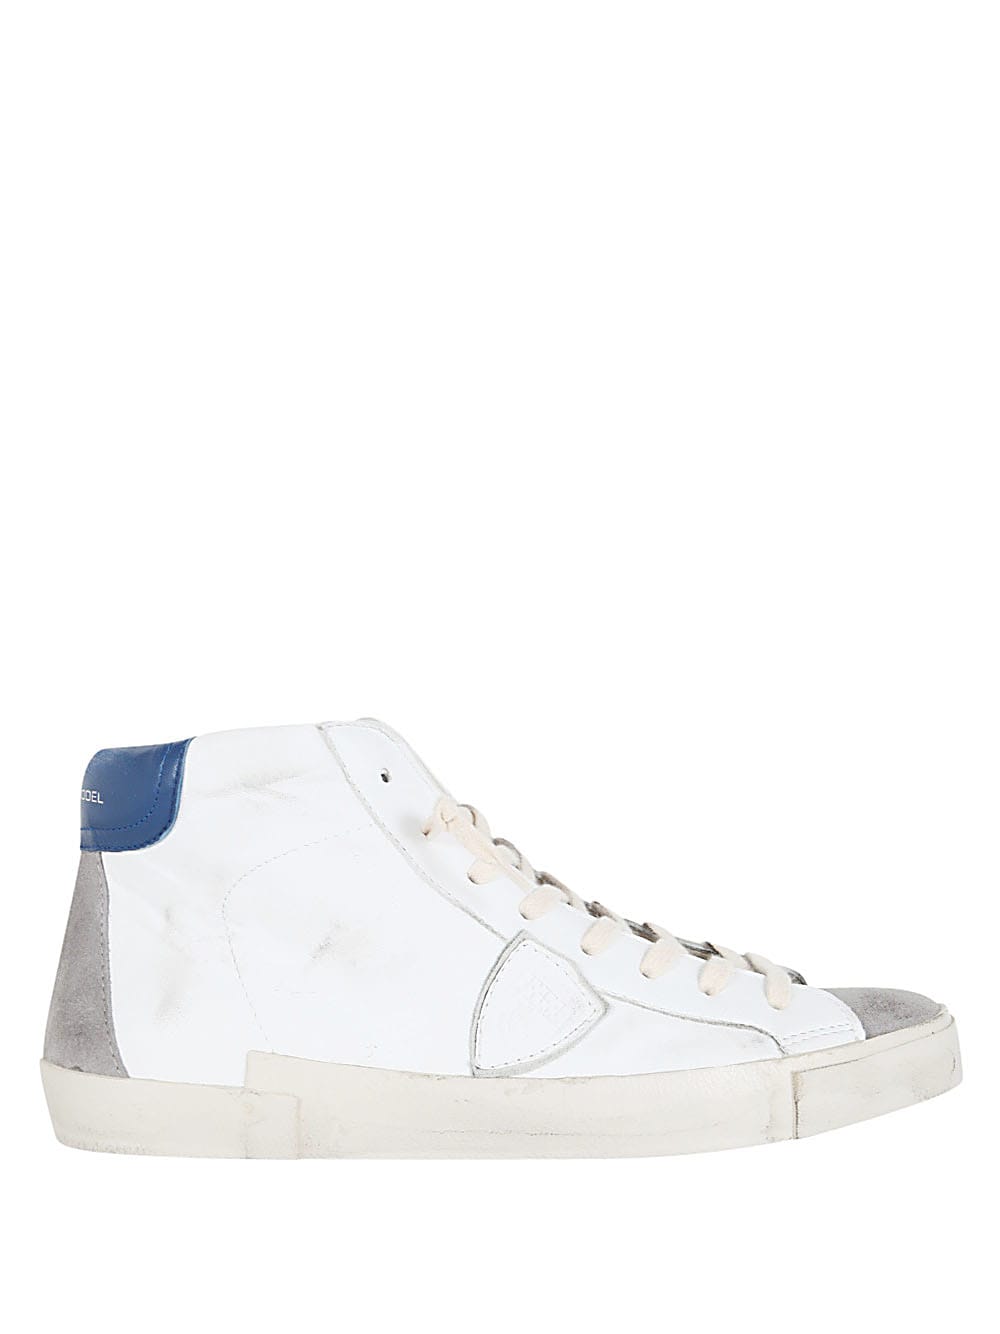 PHILIPPE MODEL PRSX HIGH MAN SNEAKERS